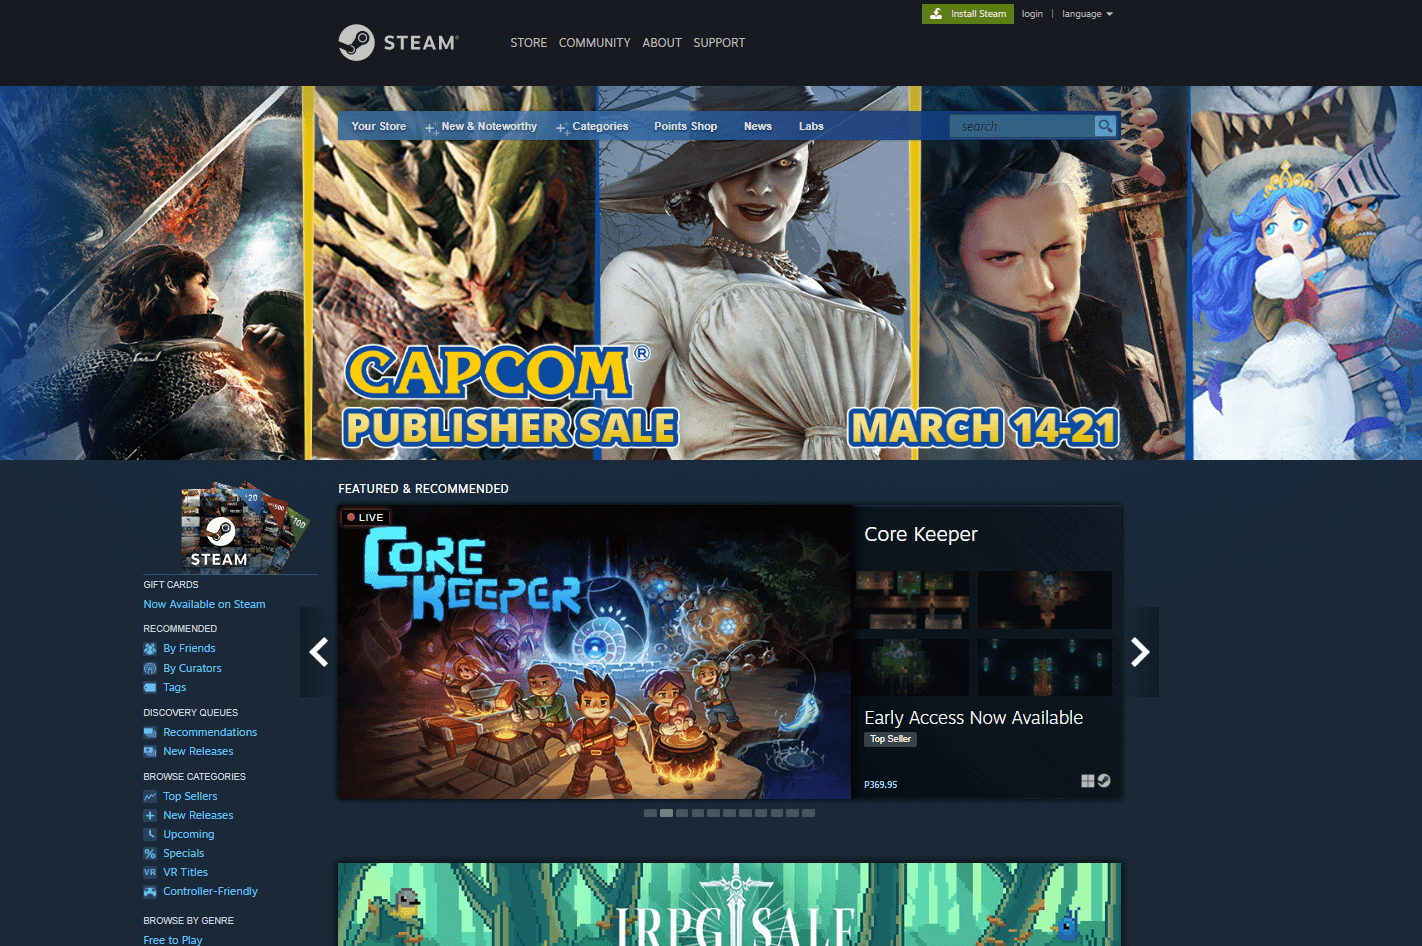 The Steam store